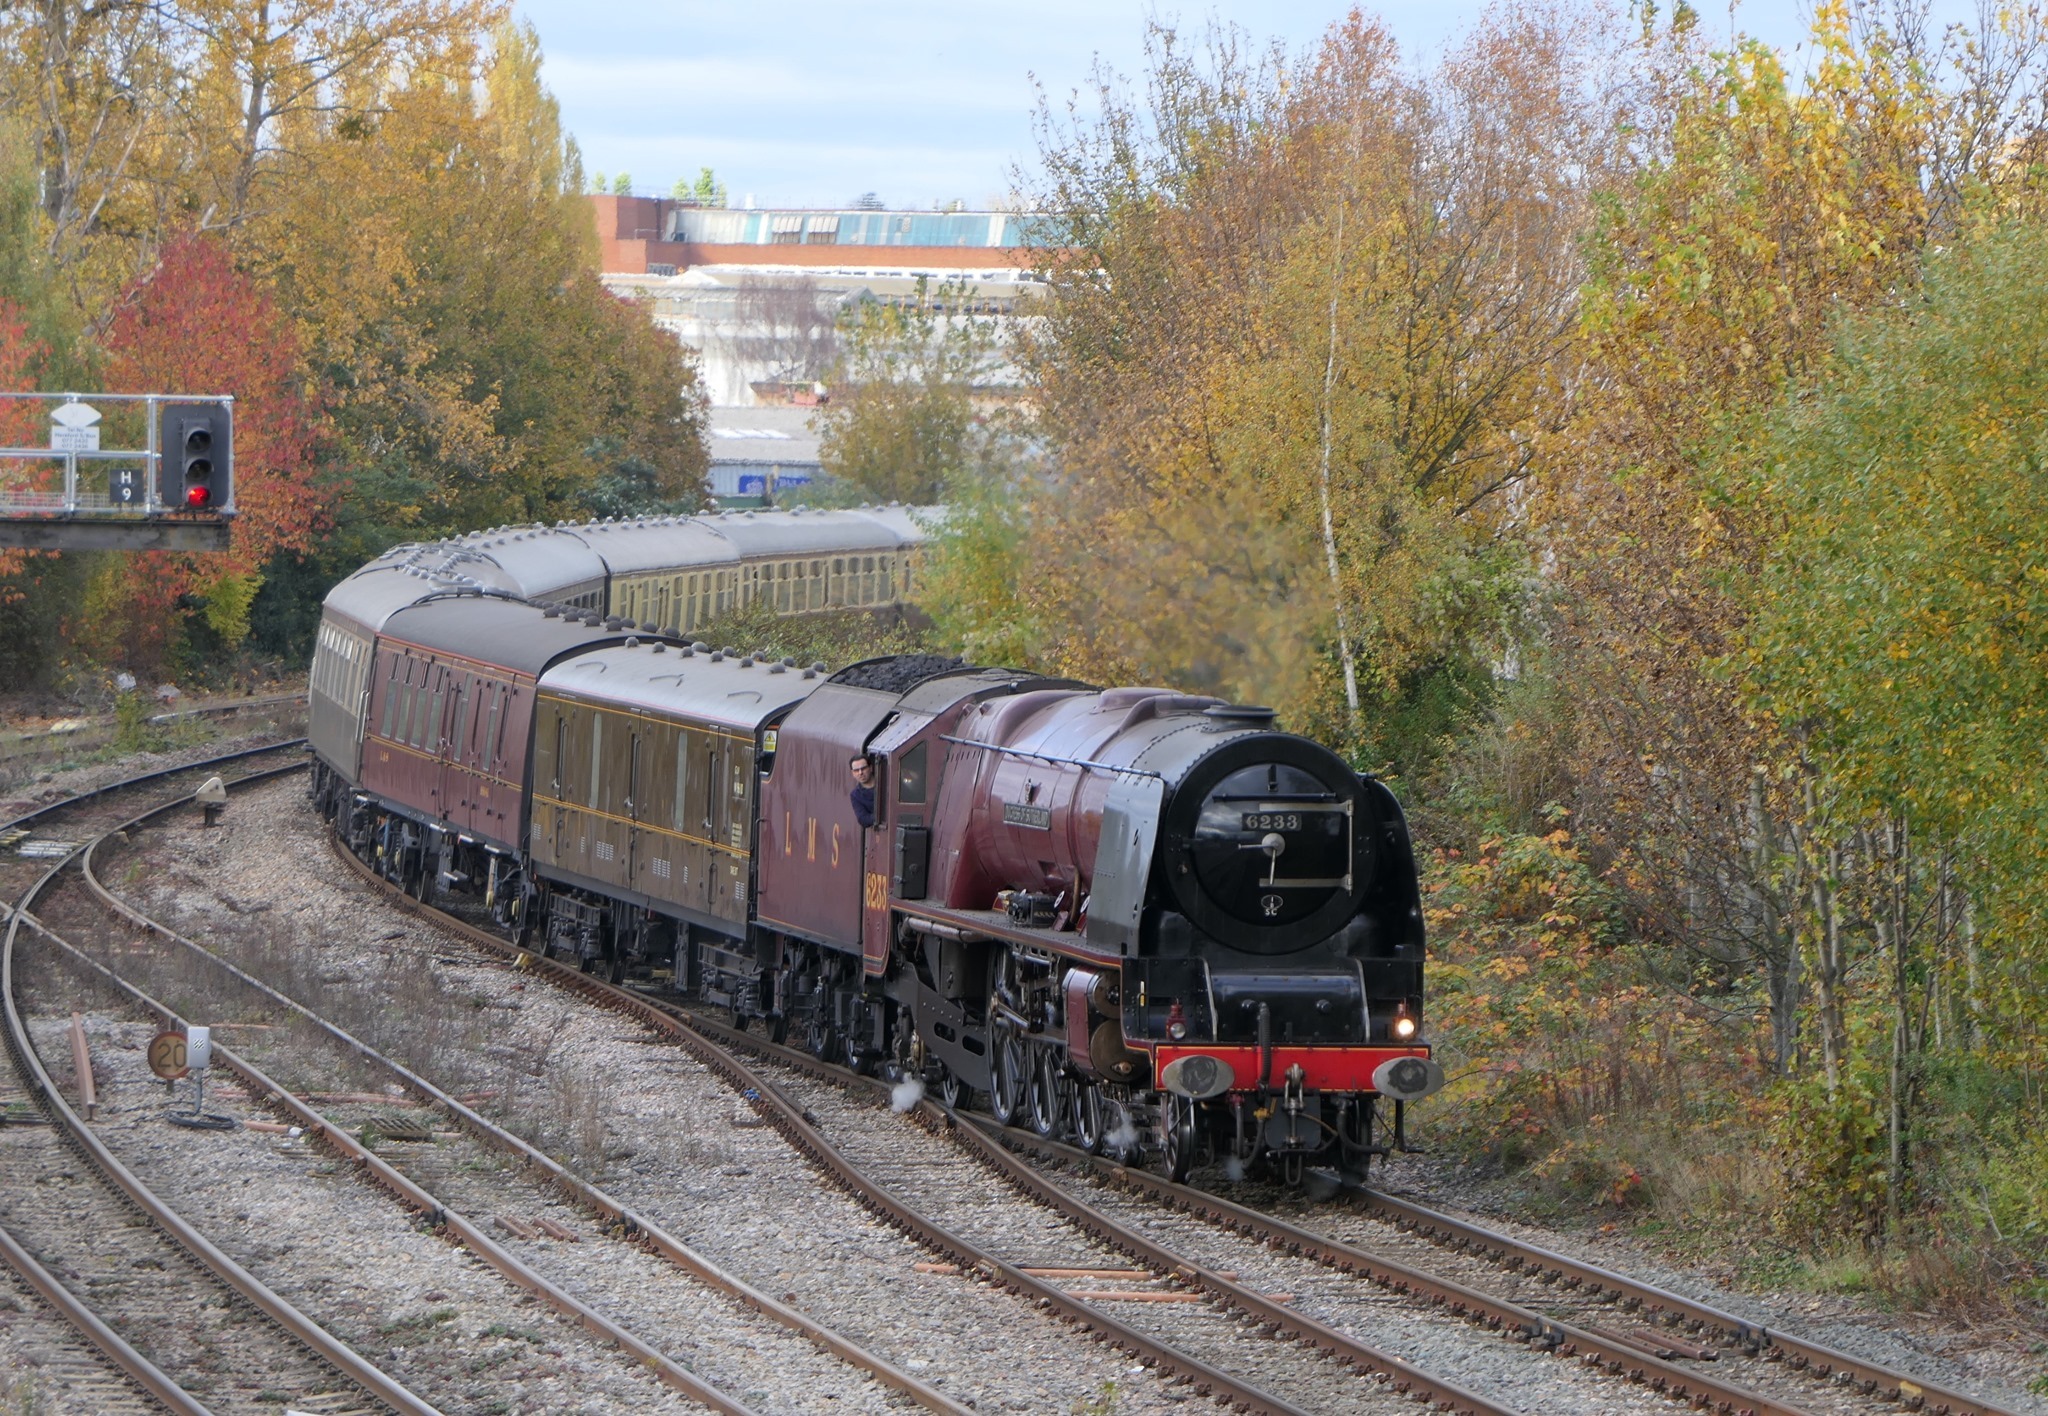 The Duchess of Sutherland pulling the Welsh Marches Express. Picture: Marnie Wooderson